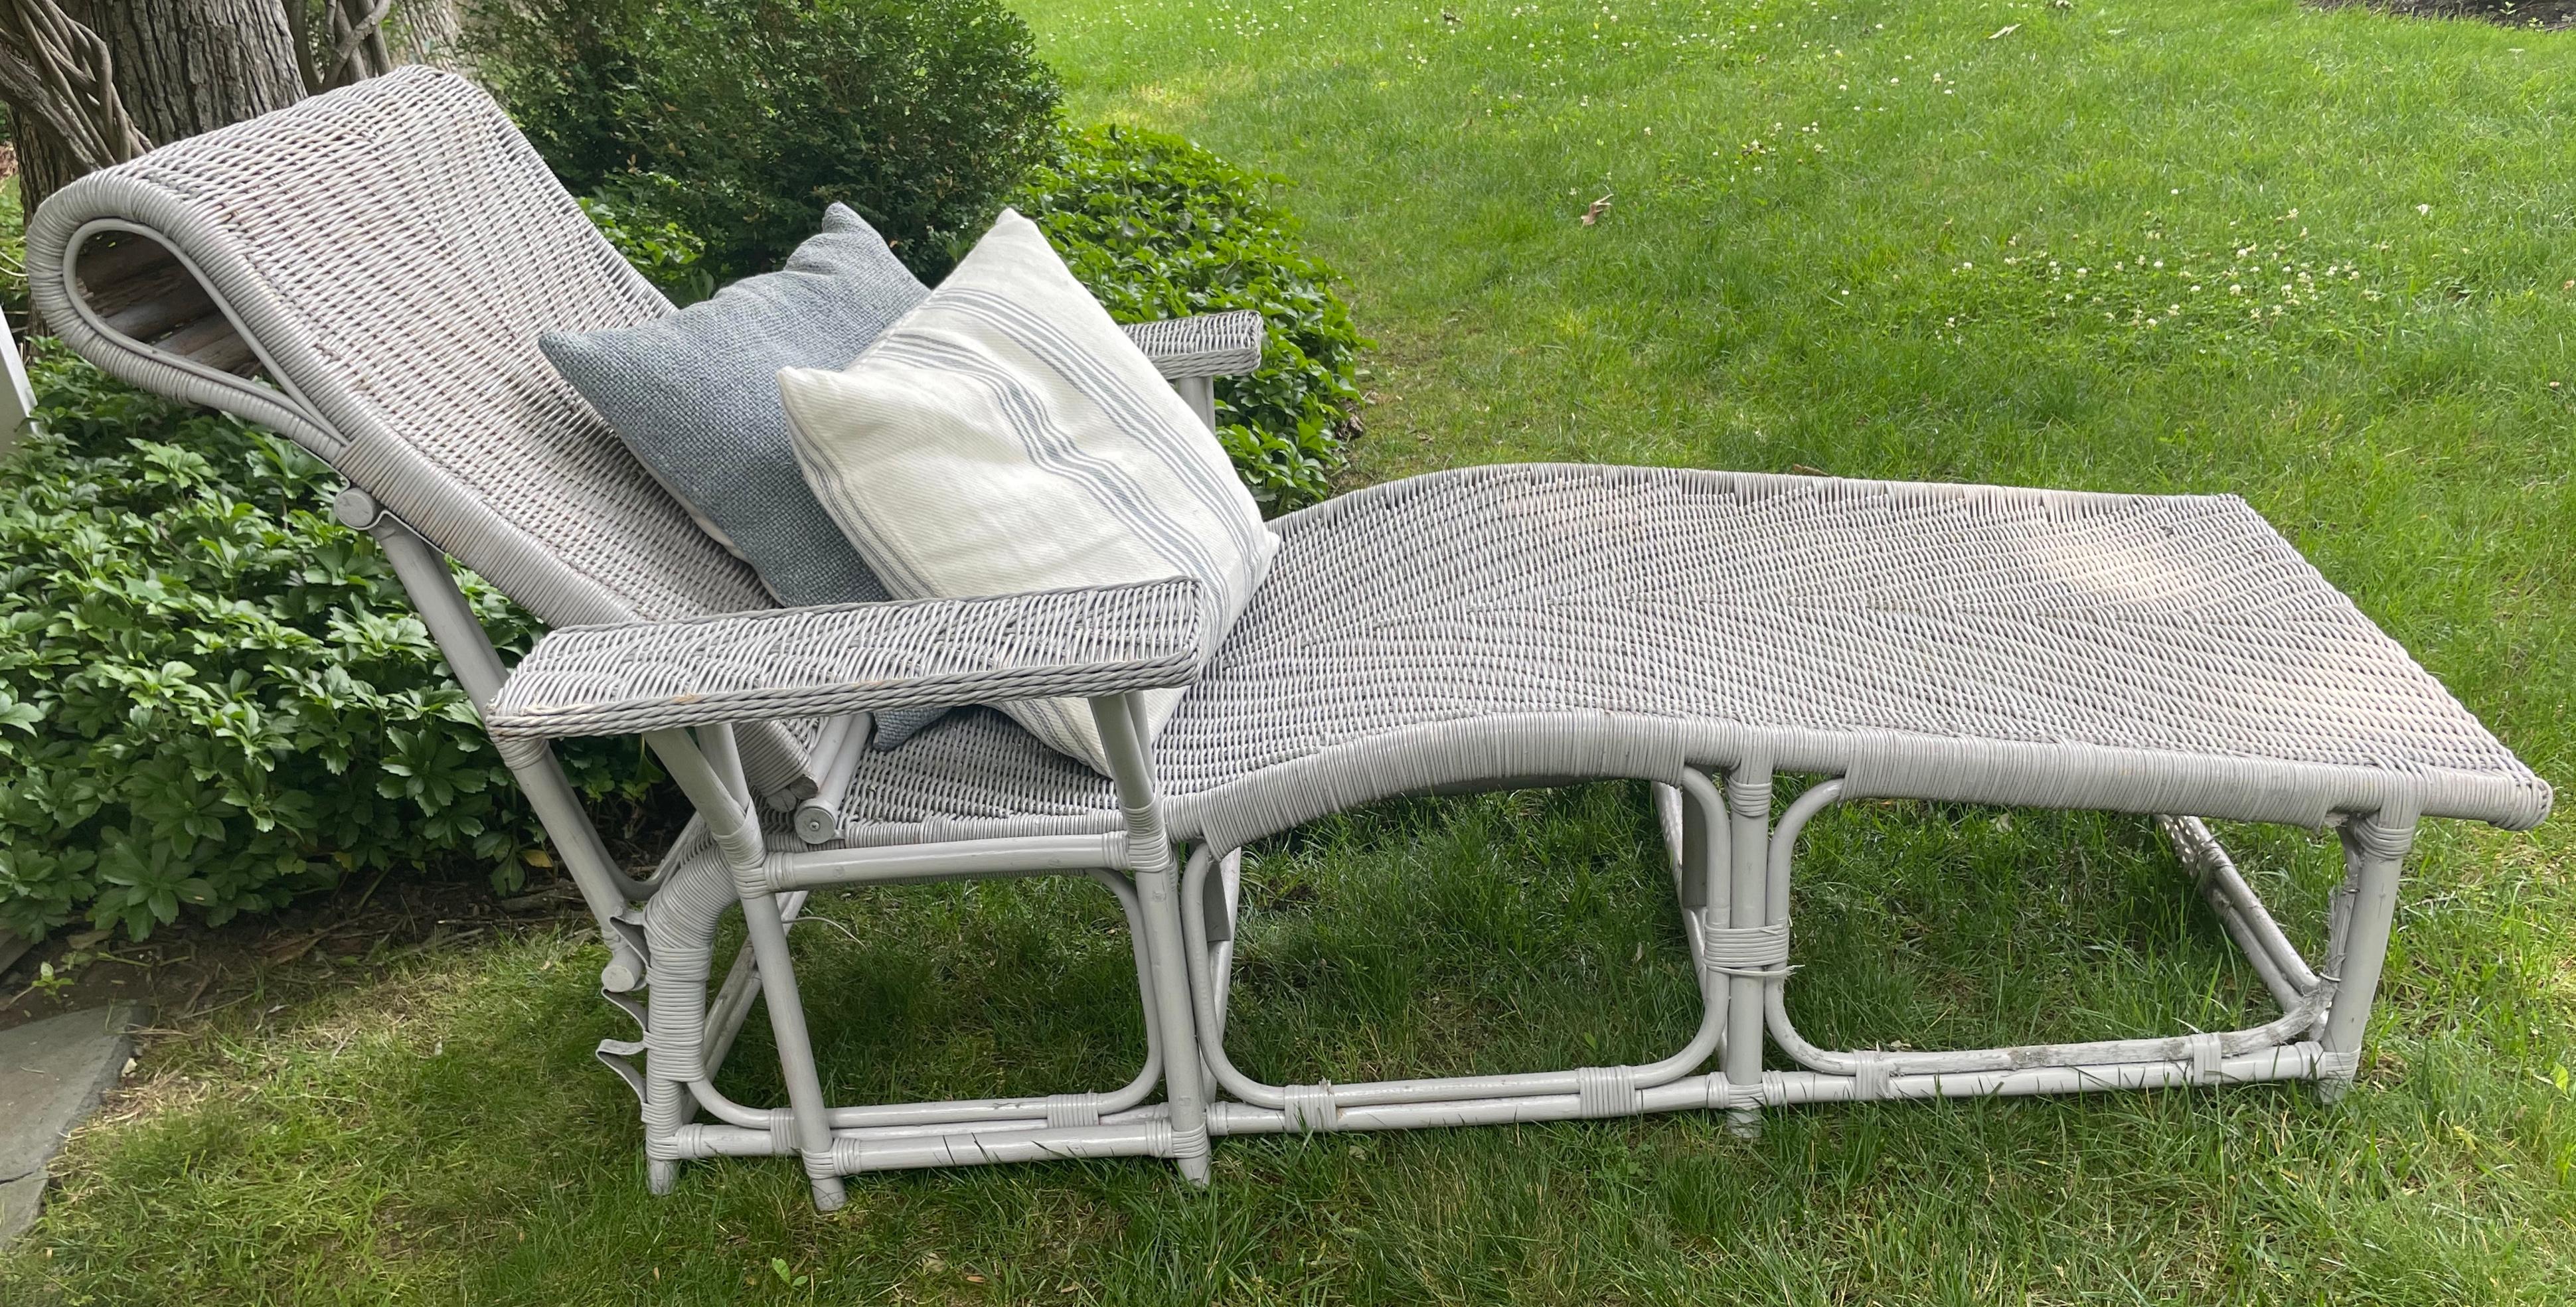 Rattan and wicker chaise lounge. Grey painted liner lounge in rattan and wicker with adjustable back rest. In very good condition and sturdy frame with only very minor losses. A very comfortable and sculptural lounge chair. France 1920’s
Dimensions: